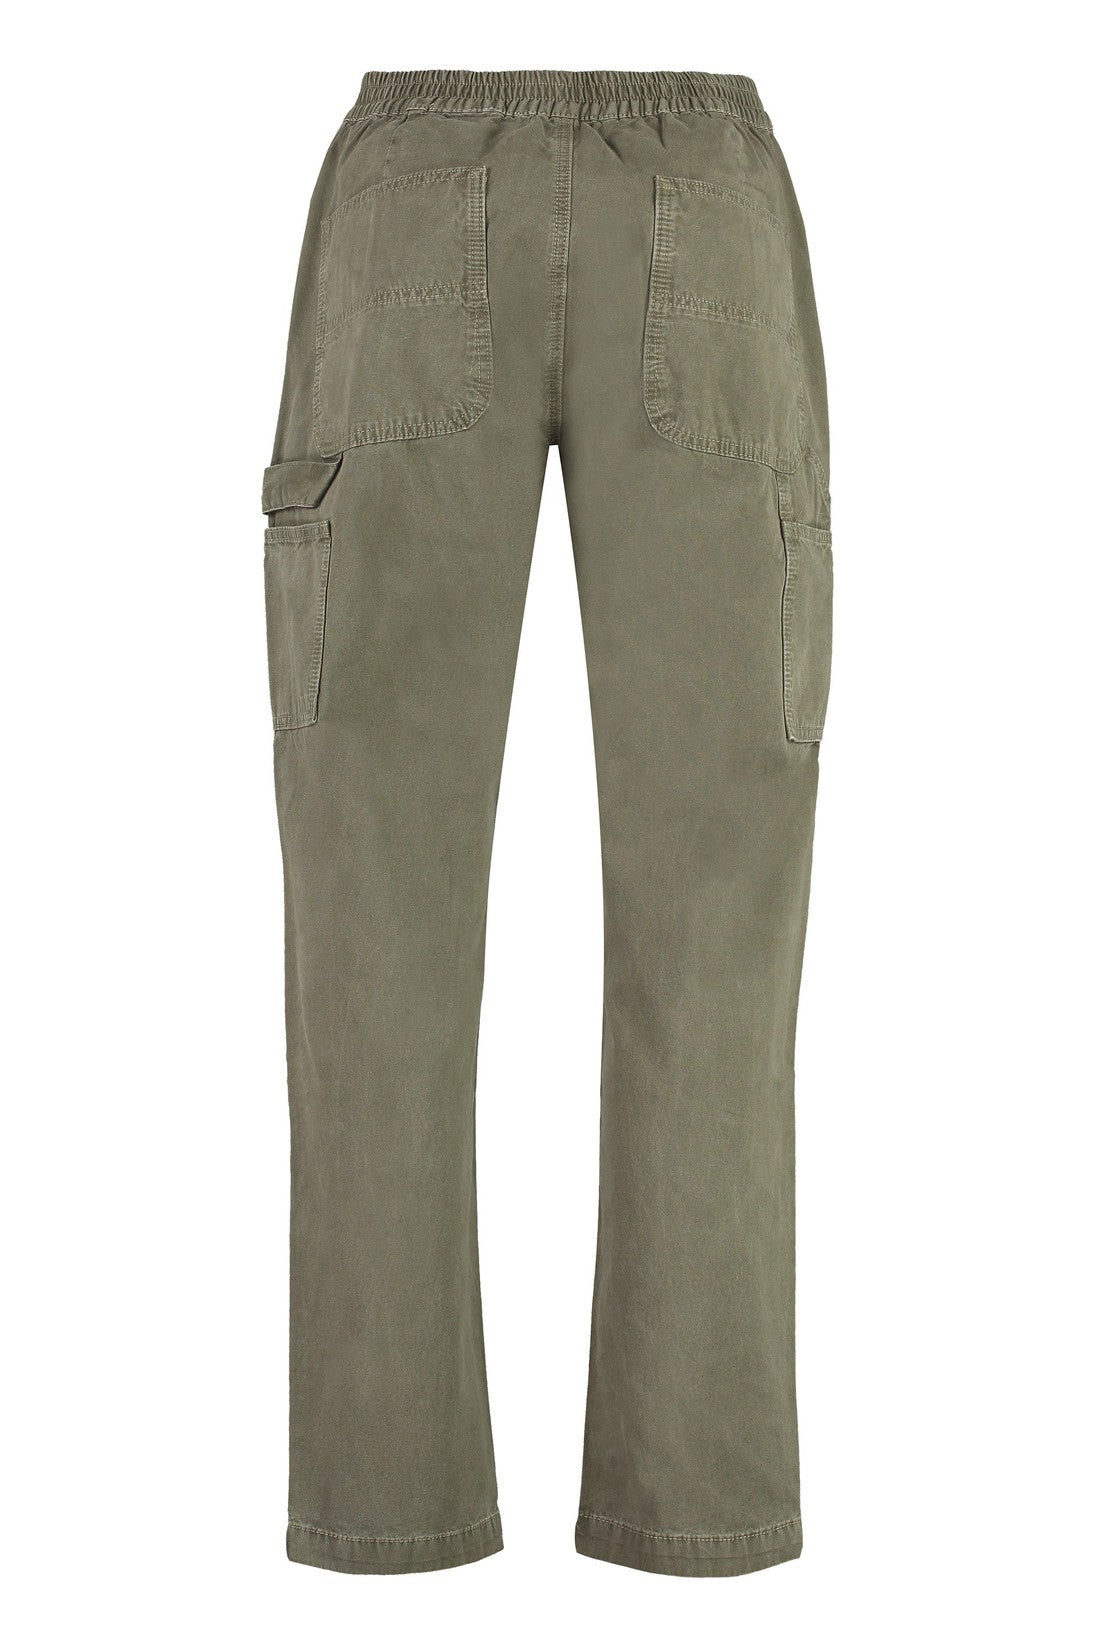 Moschino-OUTLET-SALE-Cotton trousers-ARCHIVIST